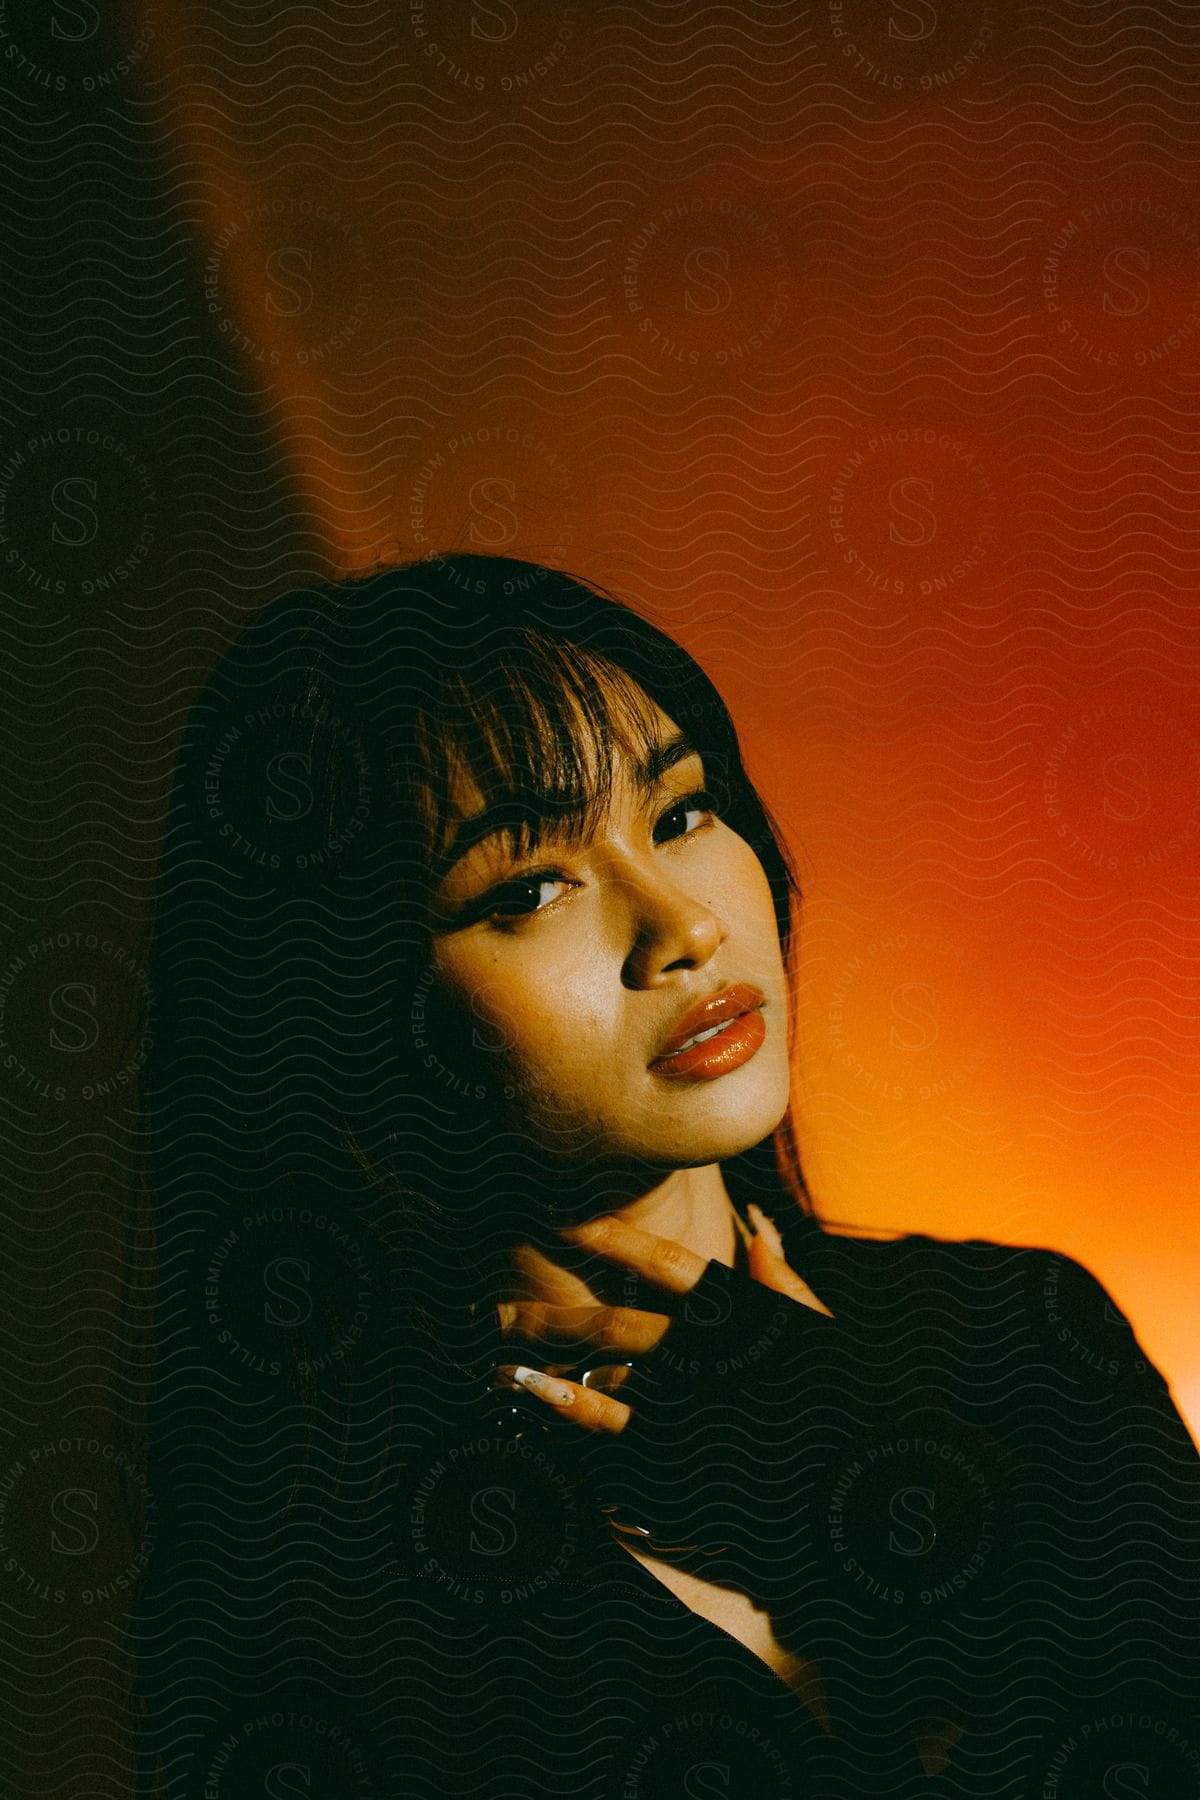 An asian young woman dressed in black poses for the camera in front of an orange wall